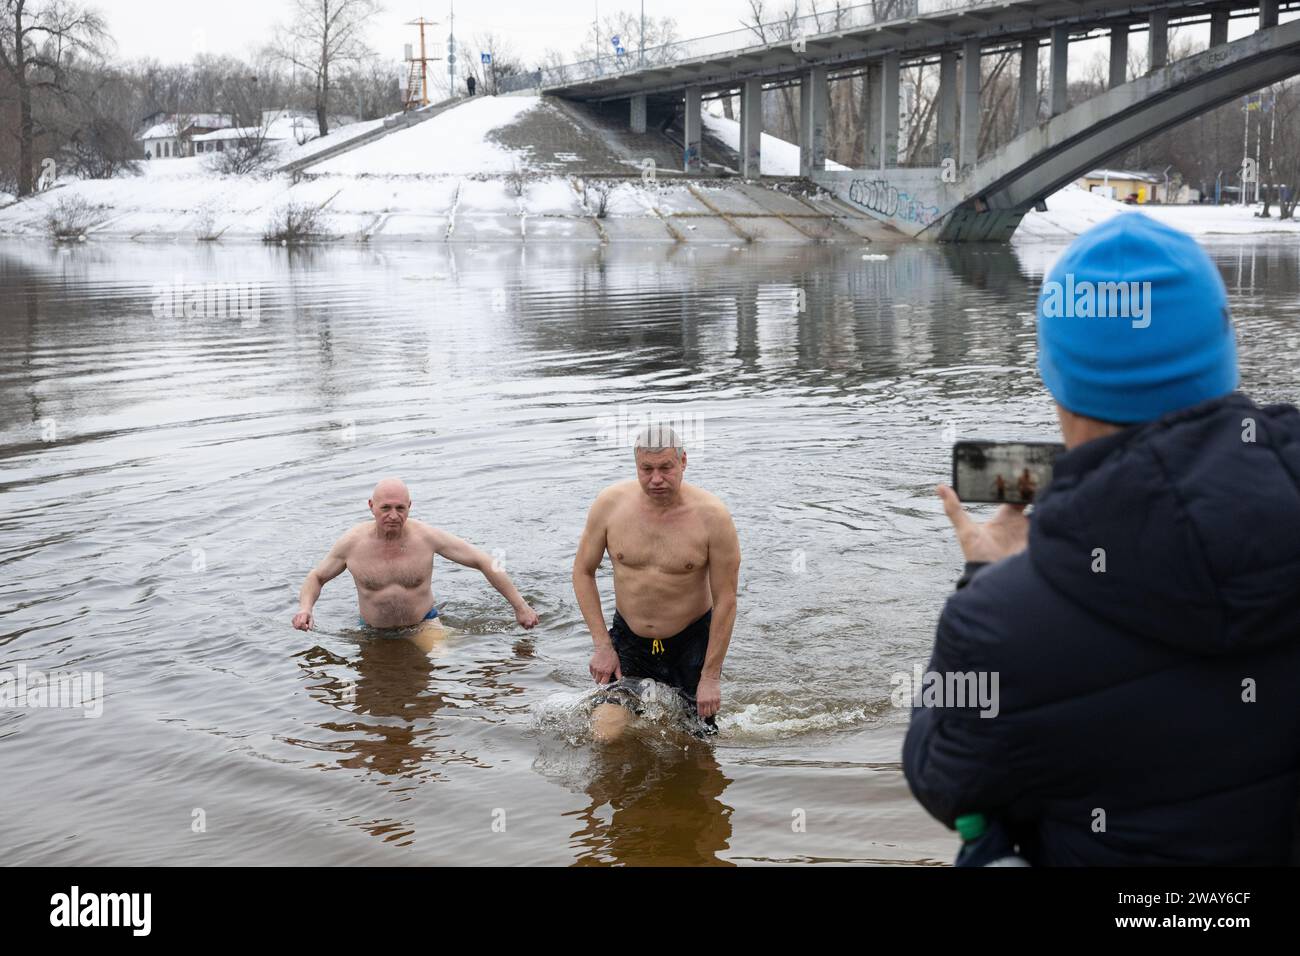 People come out of the water after swimming in cold Dnipro River on the occasion of the celebration of Epiphany in Kyiv. Ukraine celebrates Epiphany on January 6 for the first time this year, following the Western calendar, departing from the Russian Orthodox Church tradition of celebrating it on January 19. During Epiphany, some people believe that the waters have special curative properties and can be used to treat various illnesses, and many of them take baths in the water as part of Epiphany celebration. (Photo by Oleksii Chumachenko/SOPA Images/Sipa USA) Stock Photo